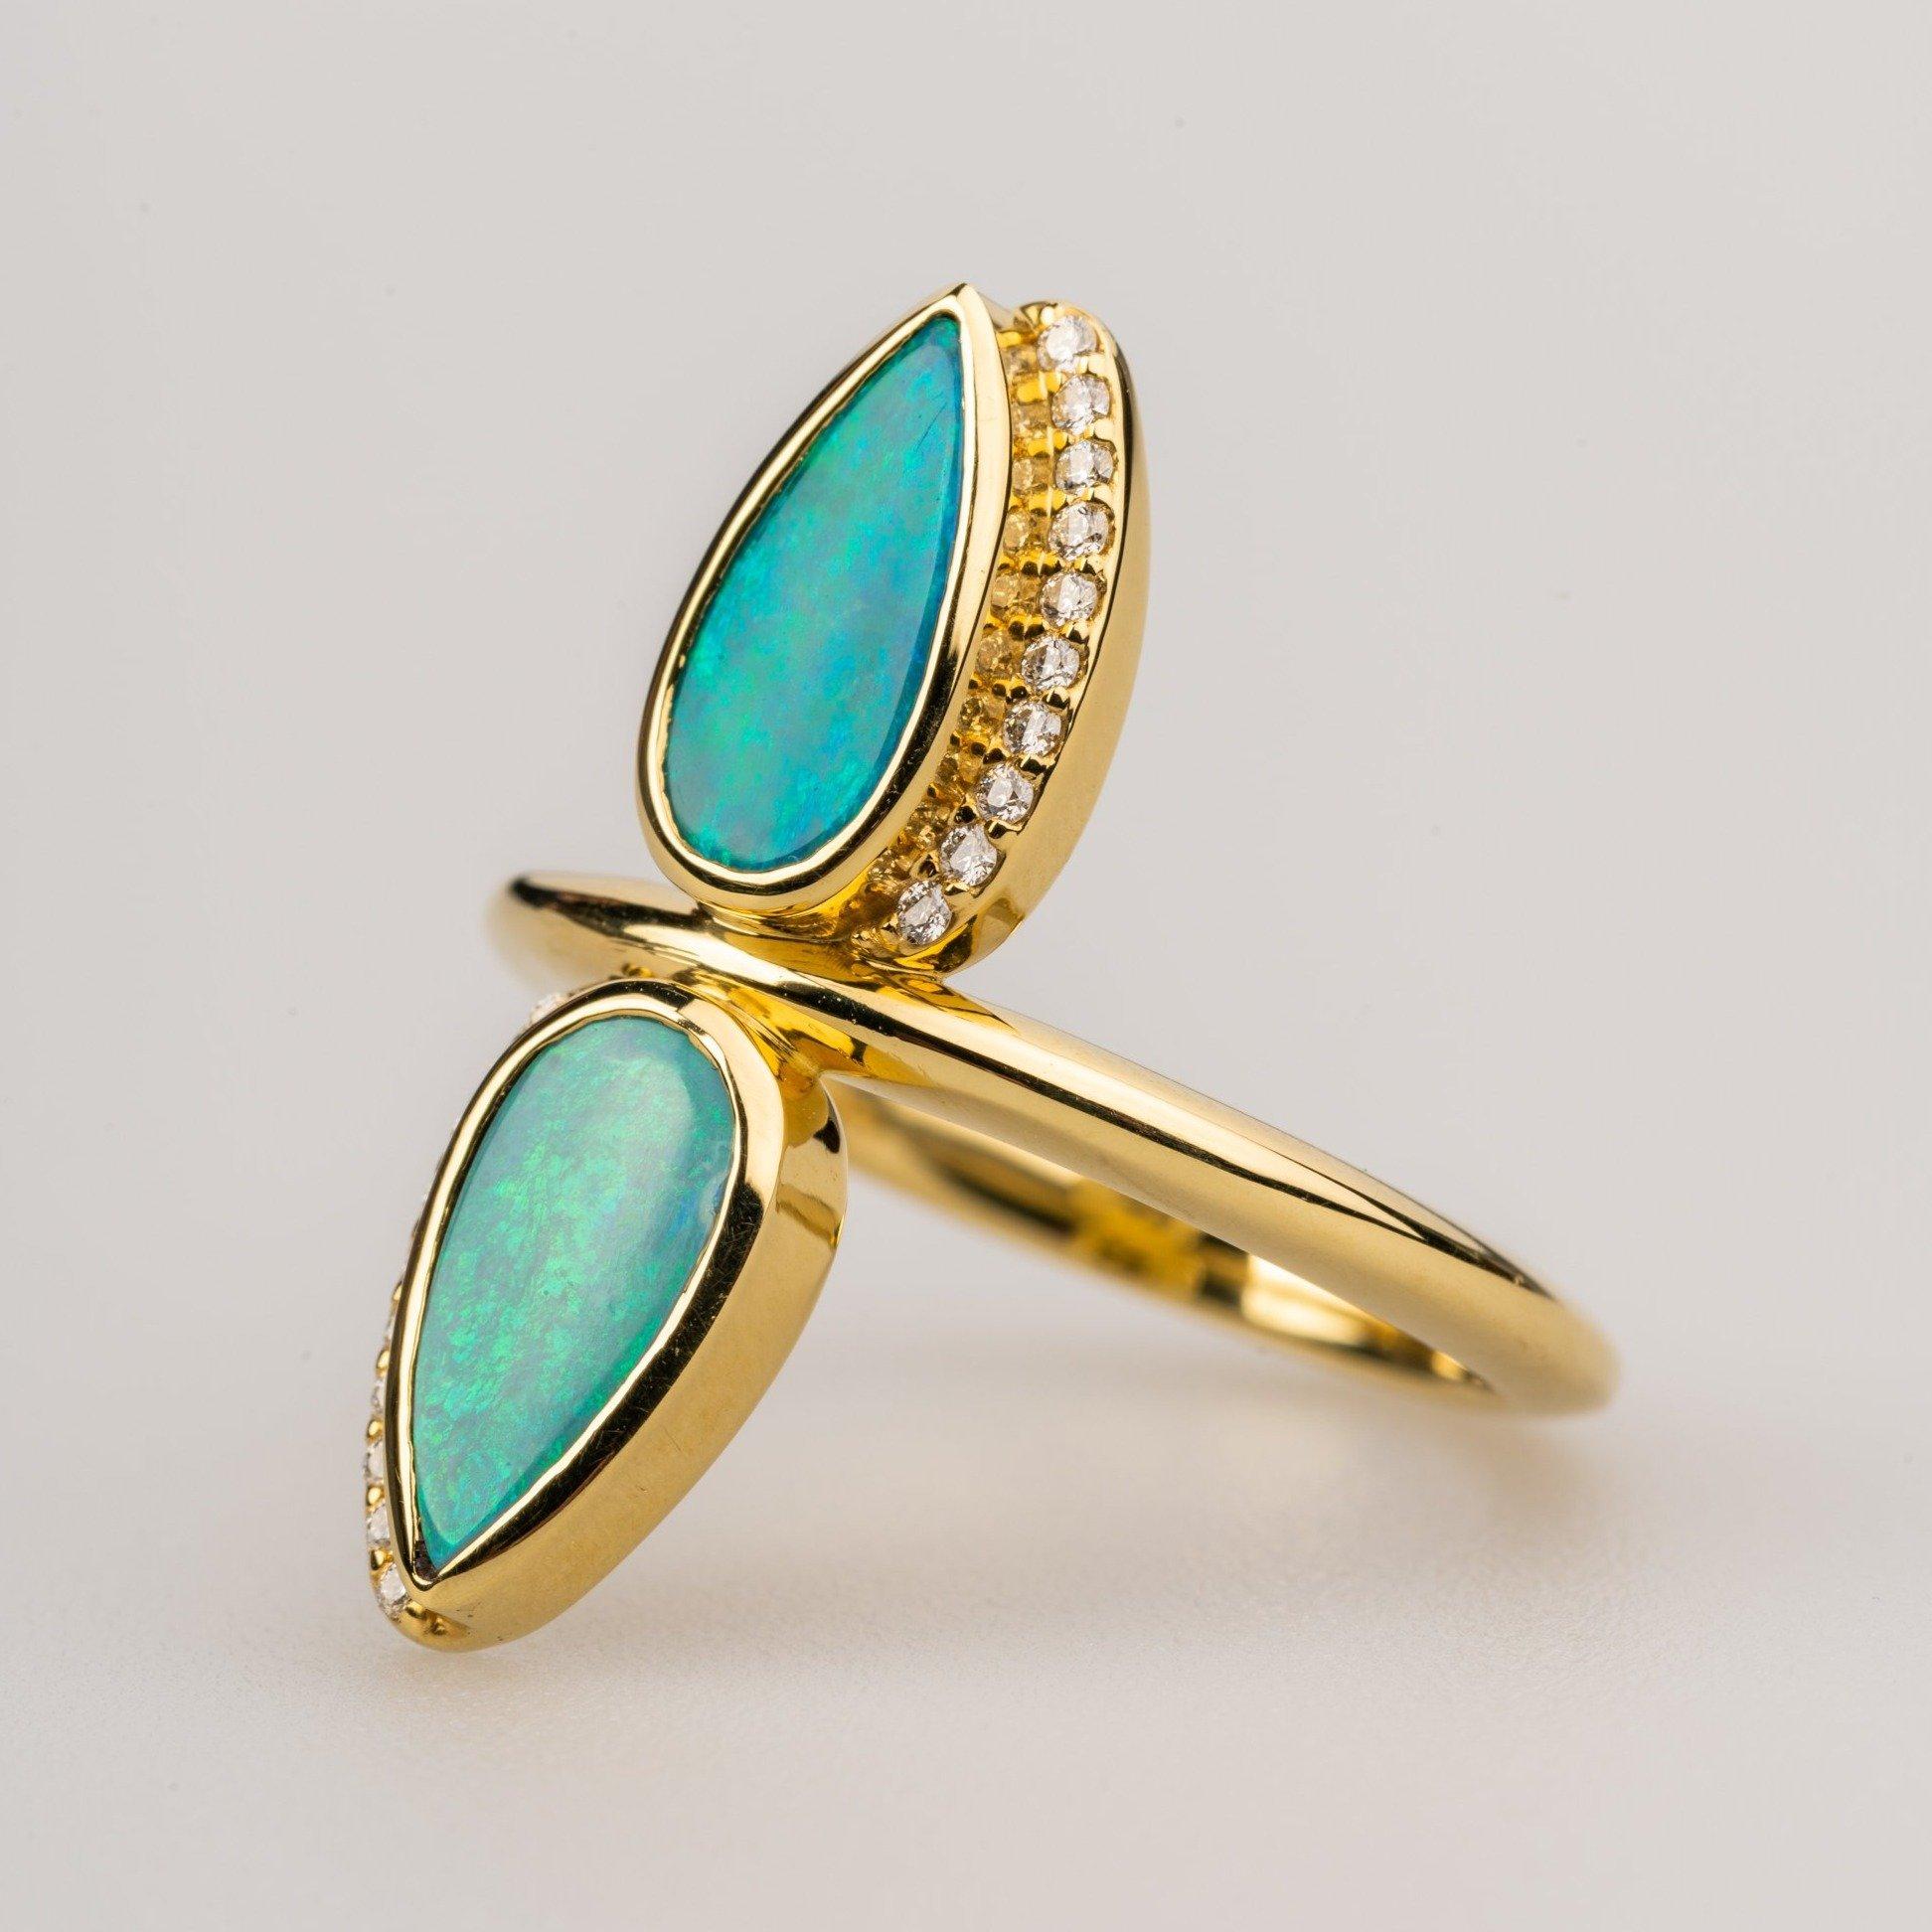 An 18k yellow gold ring featuring 2 pear shaped opal doublets and accented by .10 carats of round full cut white diamonds F color VS clarity. Ring size 6.75. This ring was made and designed by Sydney Strong.